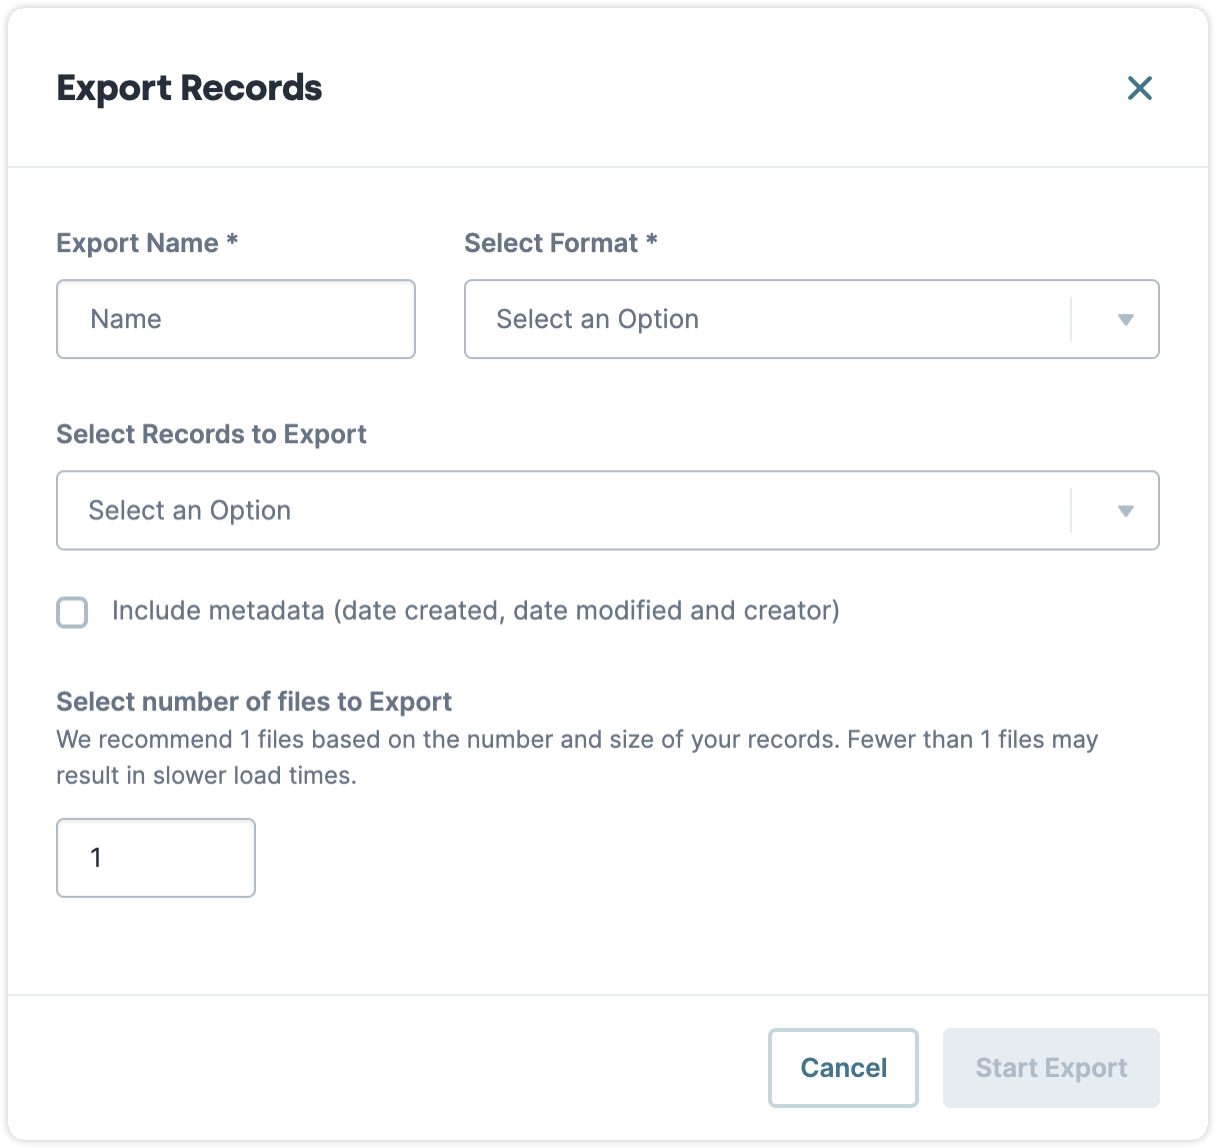 A static image displaying the Export Records window.